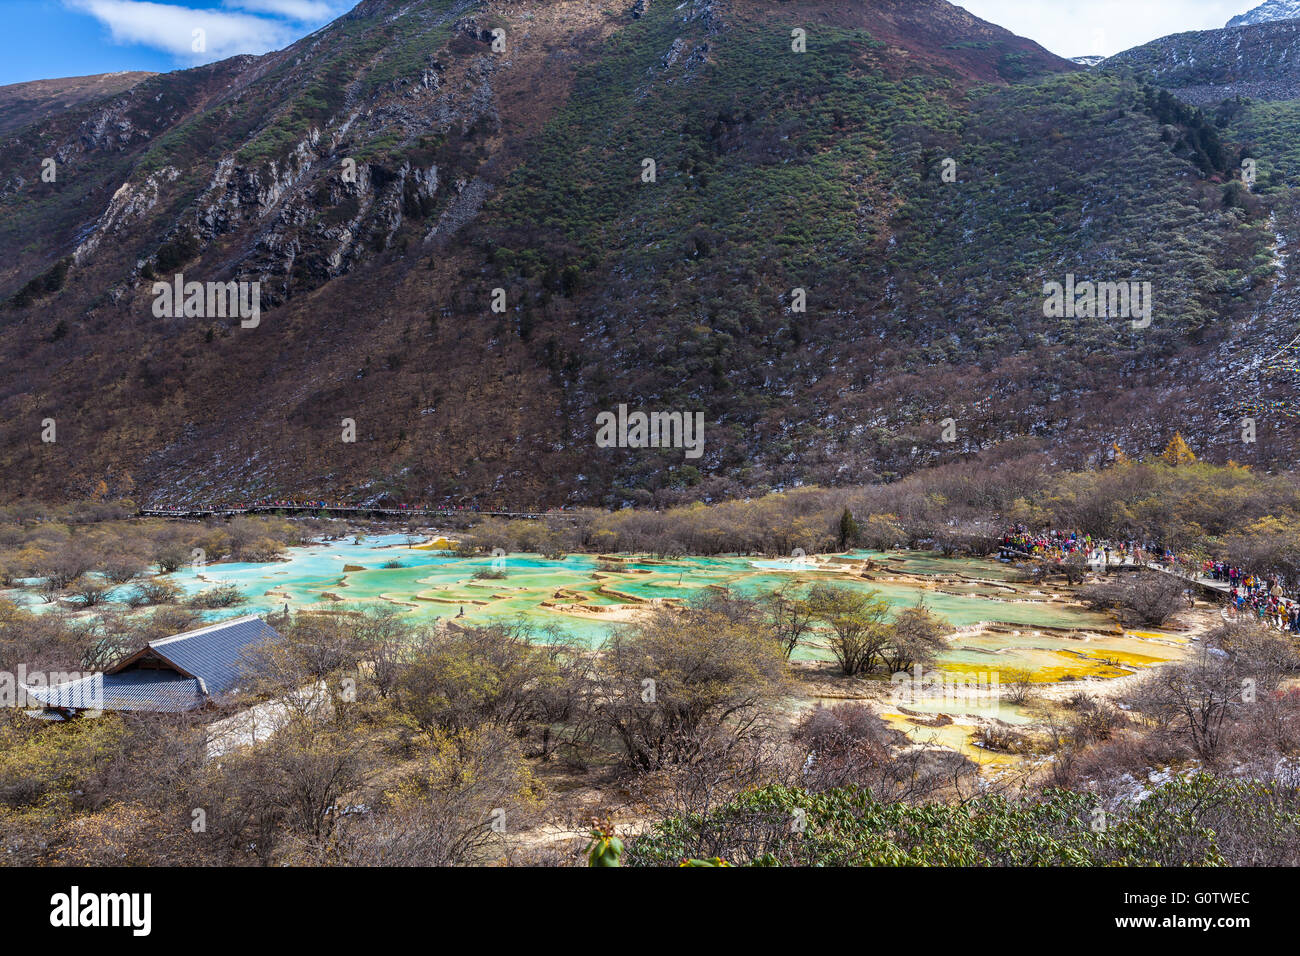 Beautiful ponds in the Huanglong national park, colorful water looks fatanstic Stock Photo